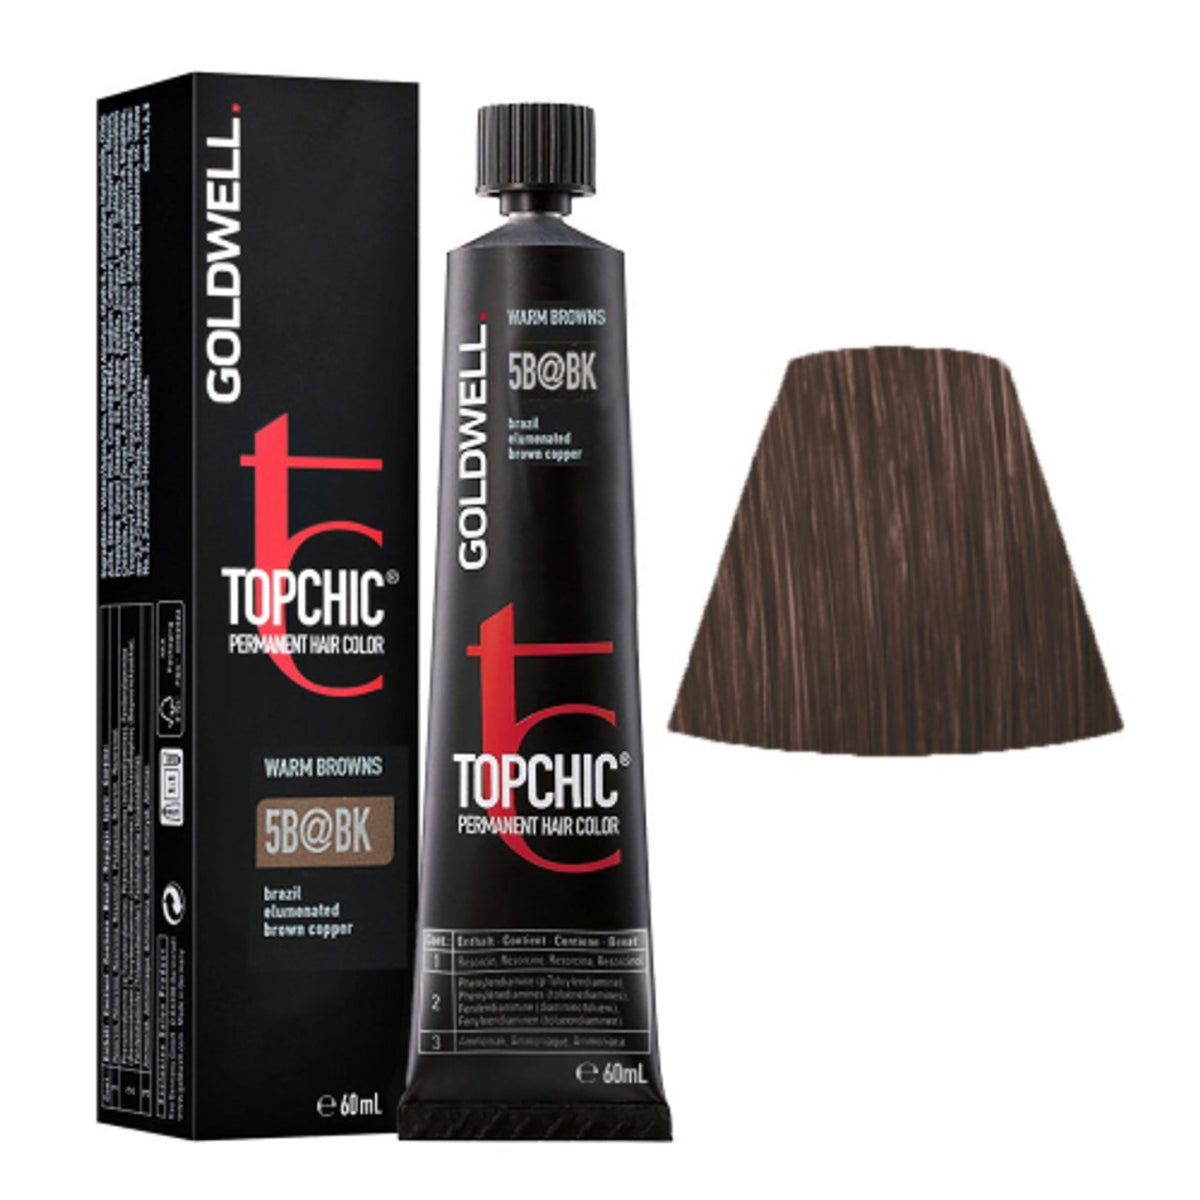 Goldwell Topchic Tube 60ml - MORE COLOURS - Southwestsix Cosmetics Goldwell Topchic Tube 60ml - MORE COLOURS - Hair Dyes Goldwell Southwestsix Cosmetics 5B@BK Goldwell Topchic Tube 60ml - MORE COLOURS -